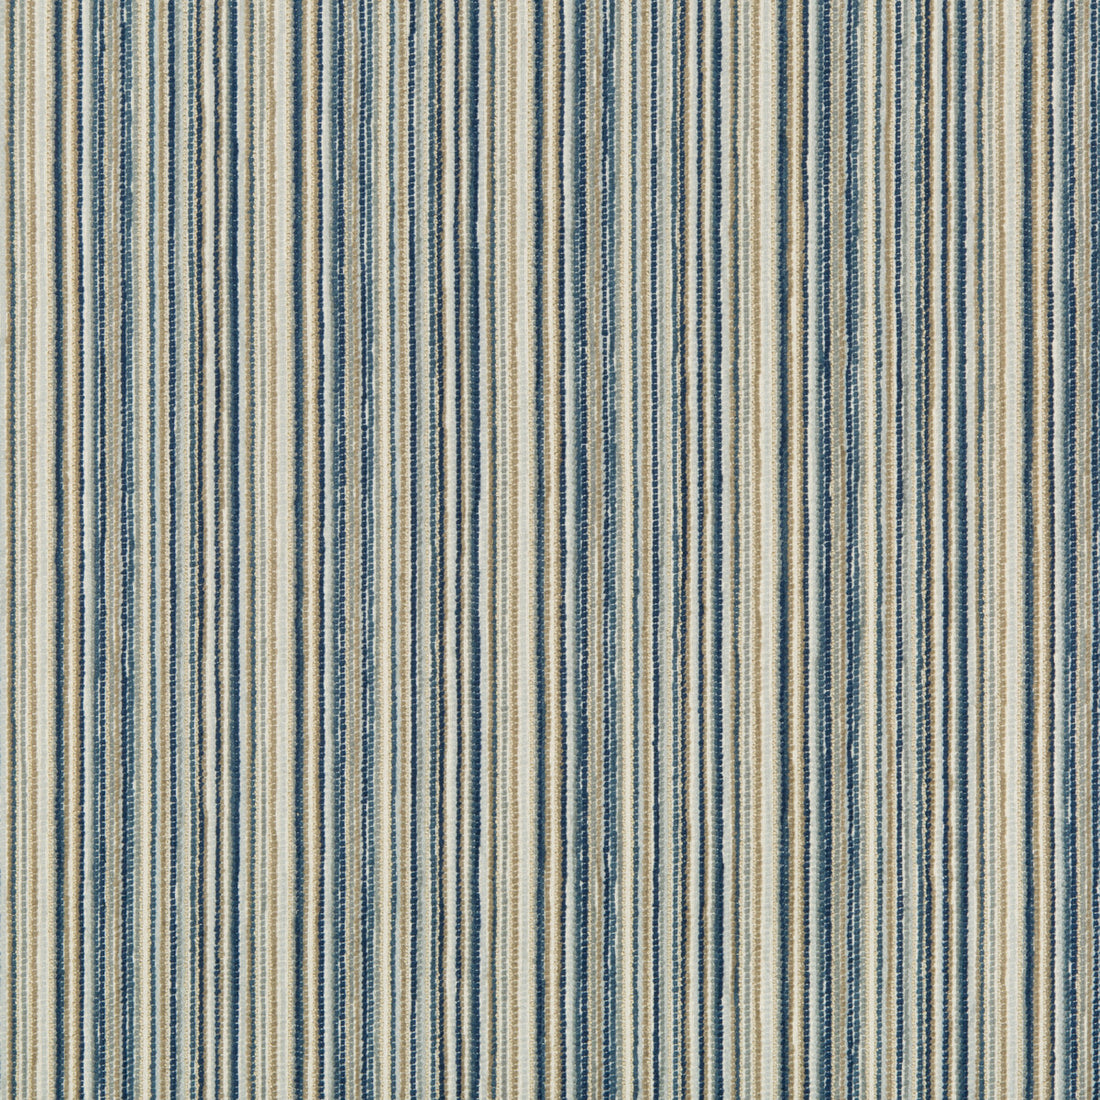 Kravet Design fabric in 34693-516 color - pattern 34693.516.0 - by Kravet Design in the Performance Crypton Home collection